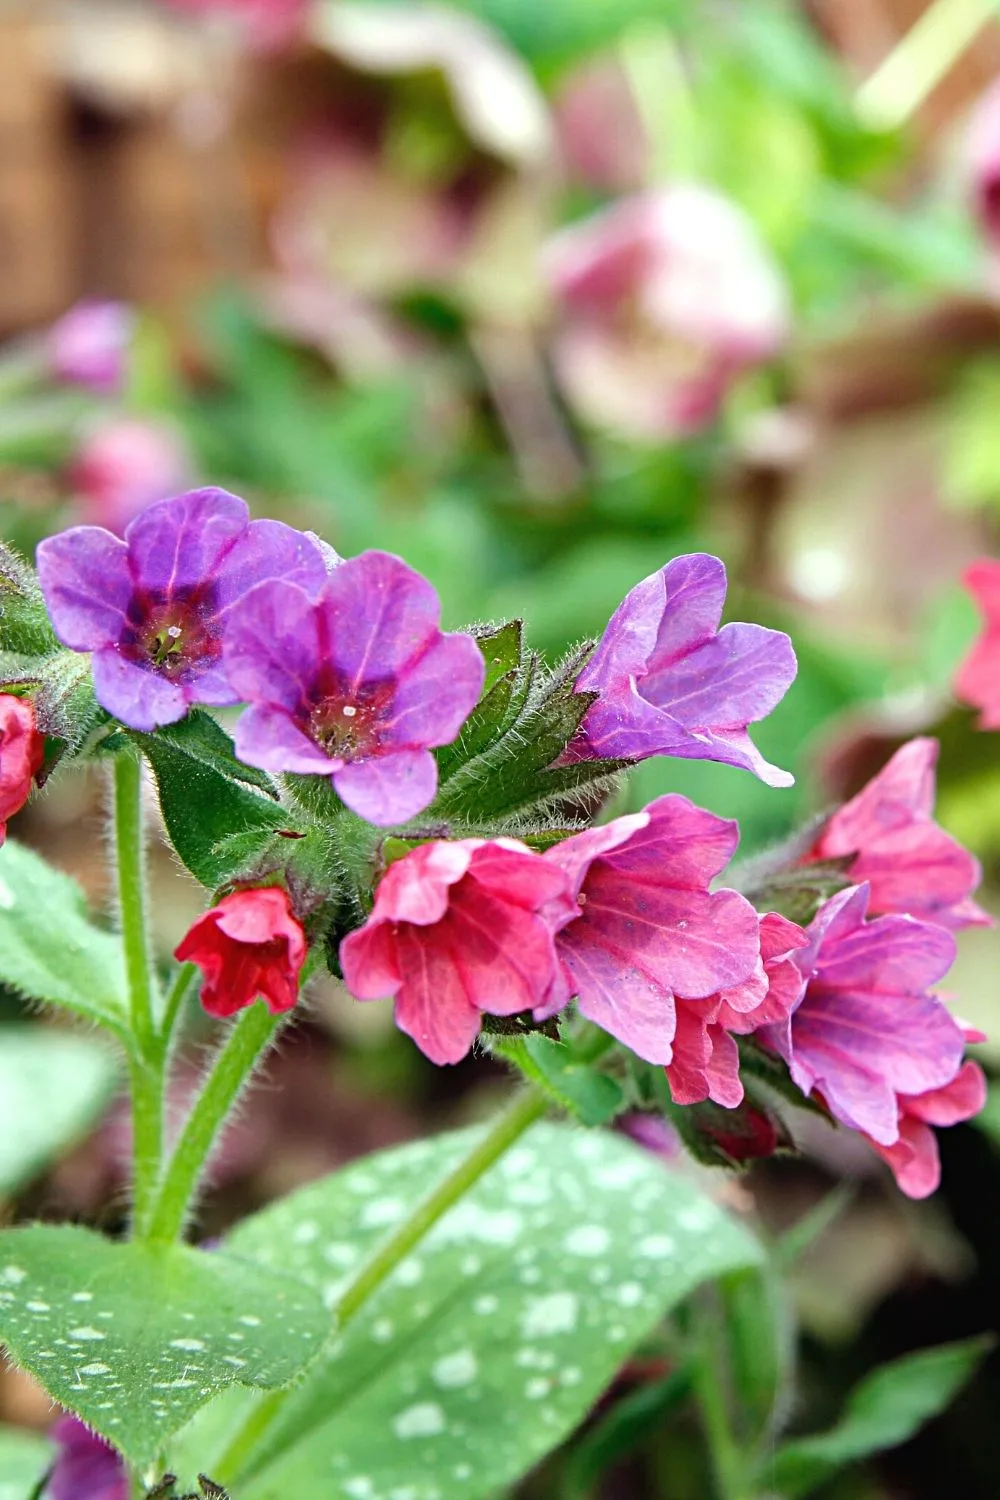 Pulmonaria, aka Lungwort, loves the darker areas of the north-facing side of the house